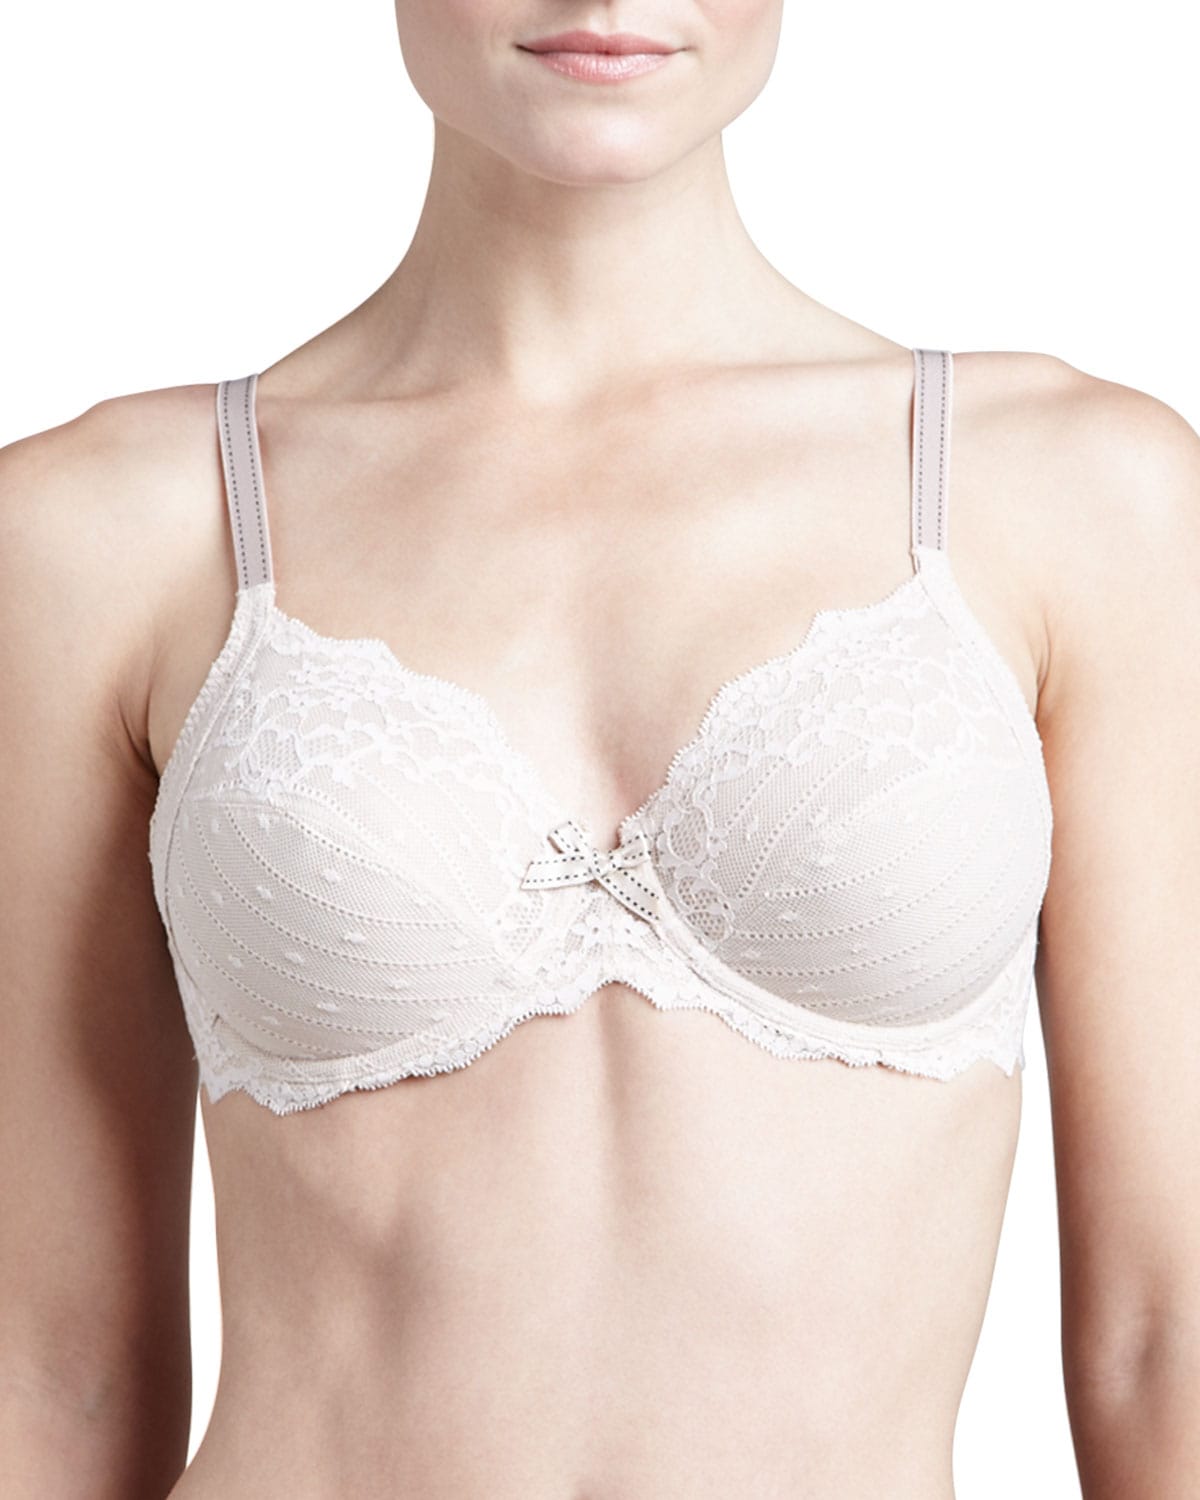 Chantelle Rive Gauche Full Coverage Unlined Bra 3281, Online Only